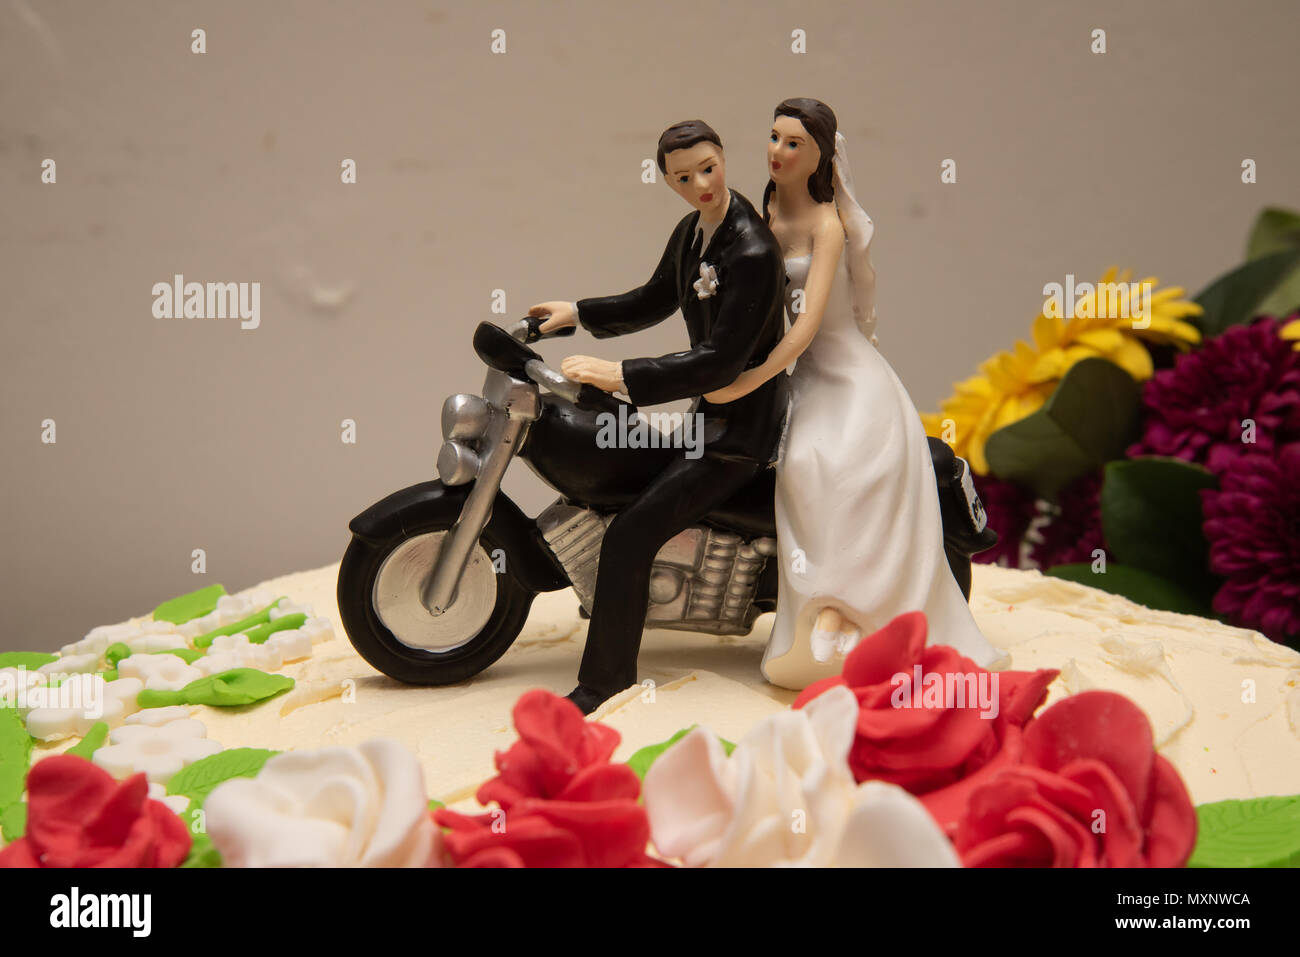 Cake topper: Bride and groom sitting on a motorcycle Stock Photo